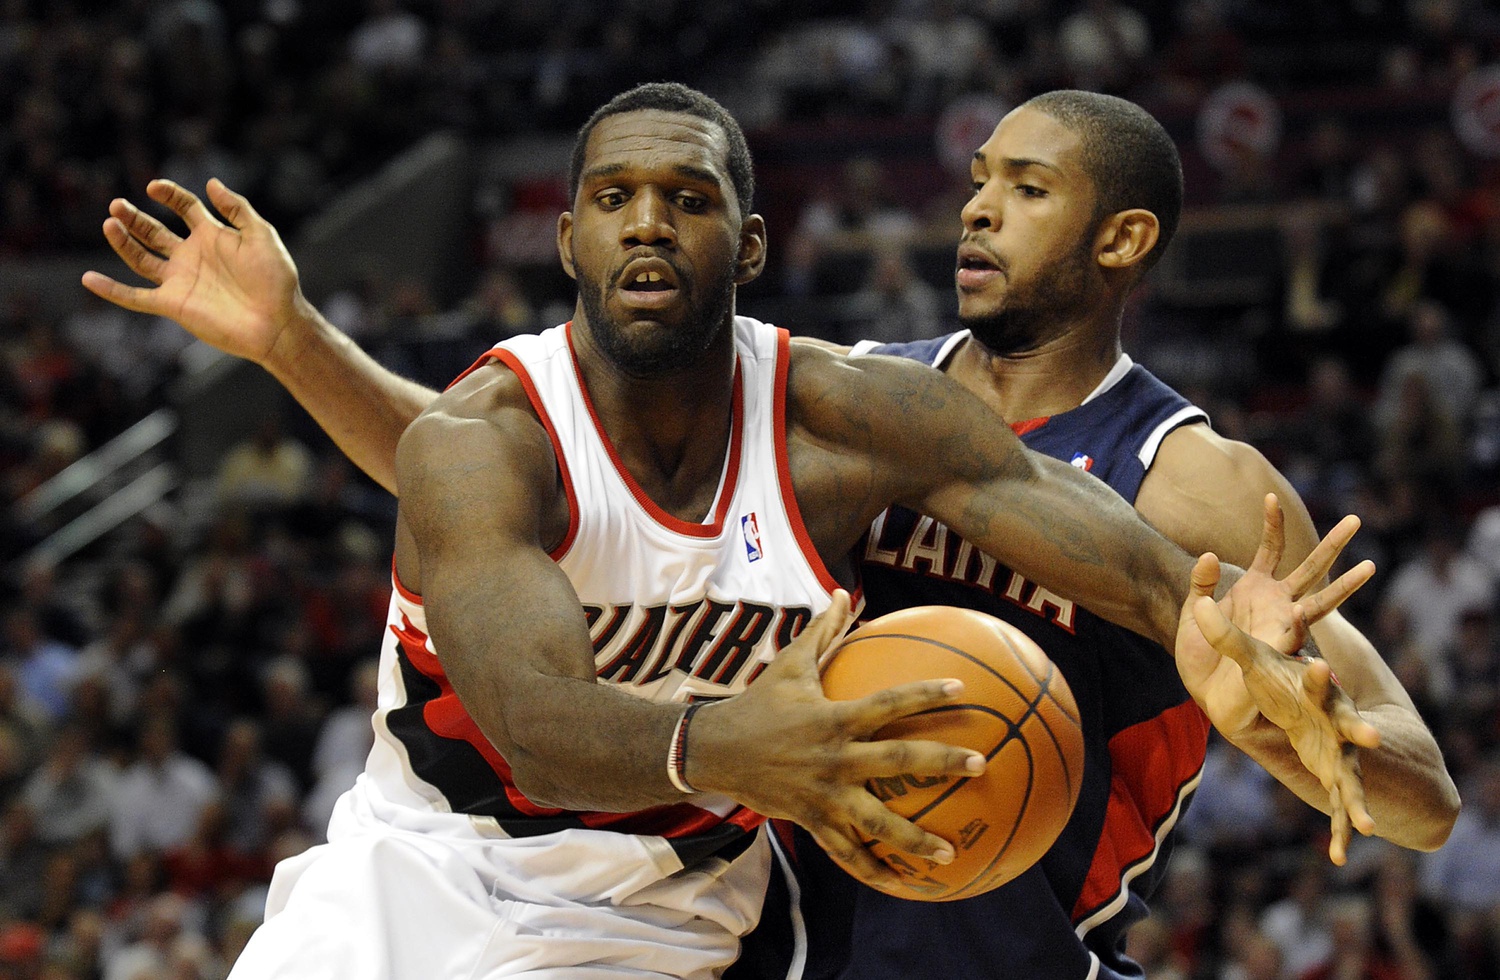 Nov. 3, 2009; Portland, OR, USA; Portland Trailblazers center Greg Oden (52) drives to the basket on Atlanta Hawks center Al Horford (15) in the fourth quarter of the game at the Rose Garden. Atlanta won the game 97-91. Mandatory Credit: Steve Dykes-USA TODAY Sports